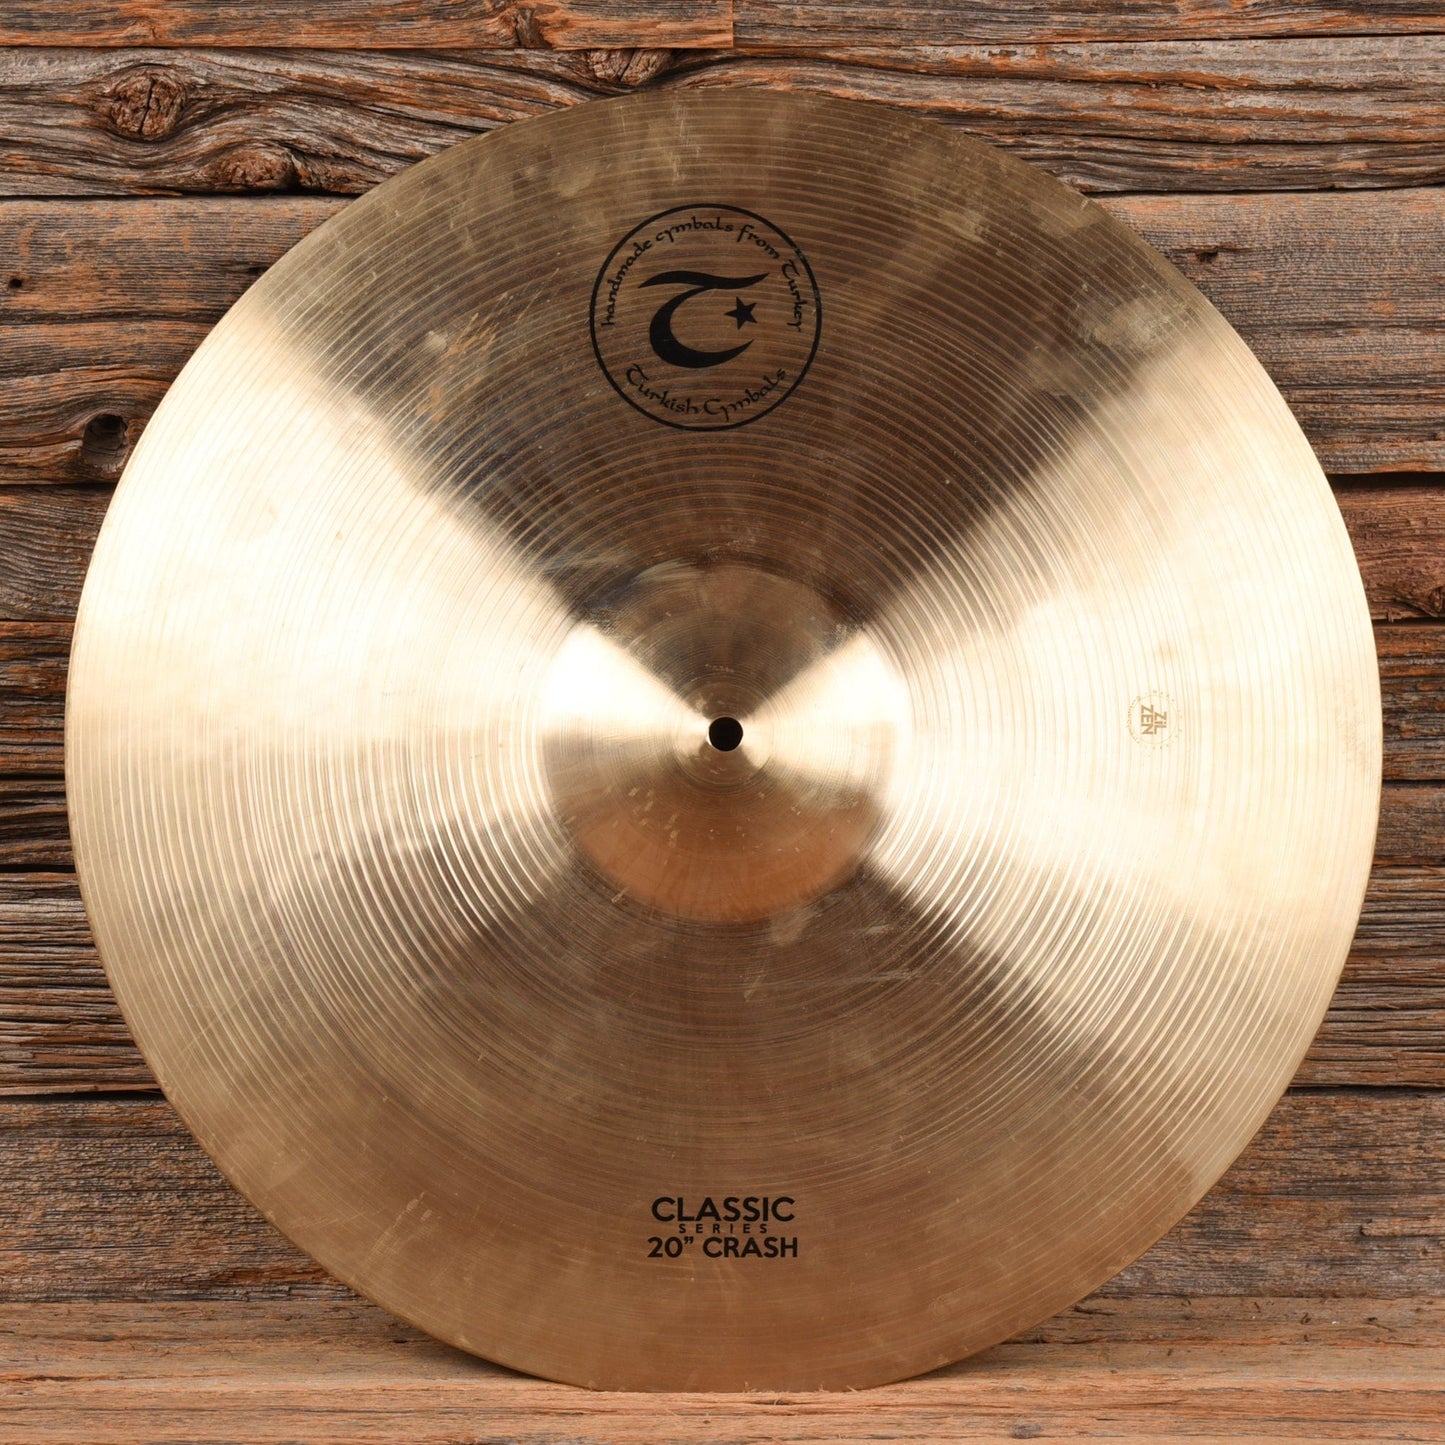 Turkish Cymbals 20" Classic Crash Cymbal USED Drums and Percussion